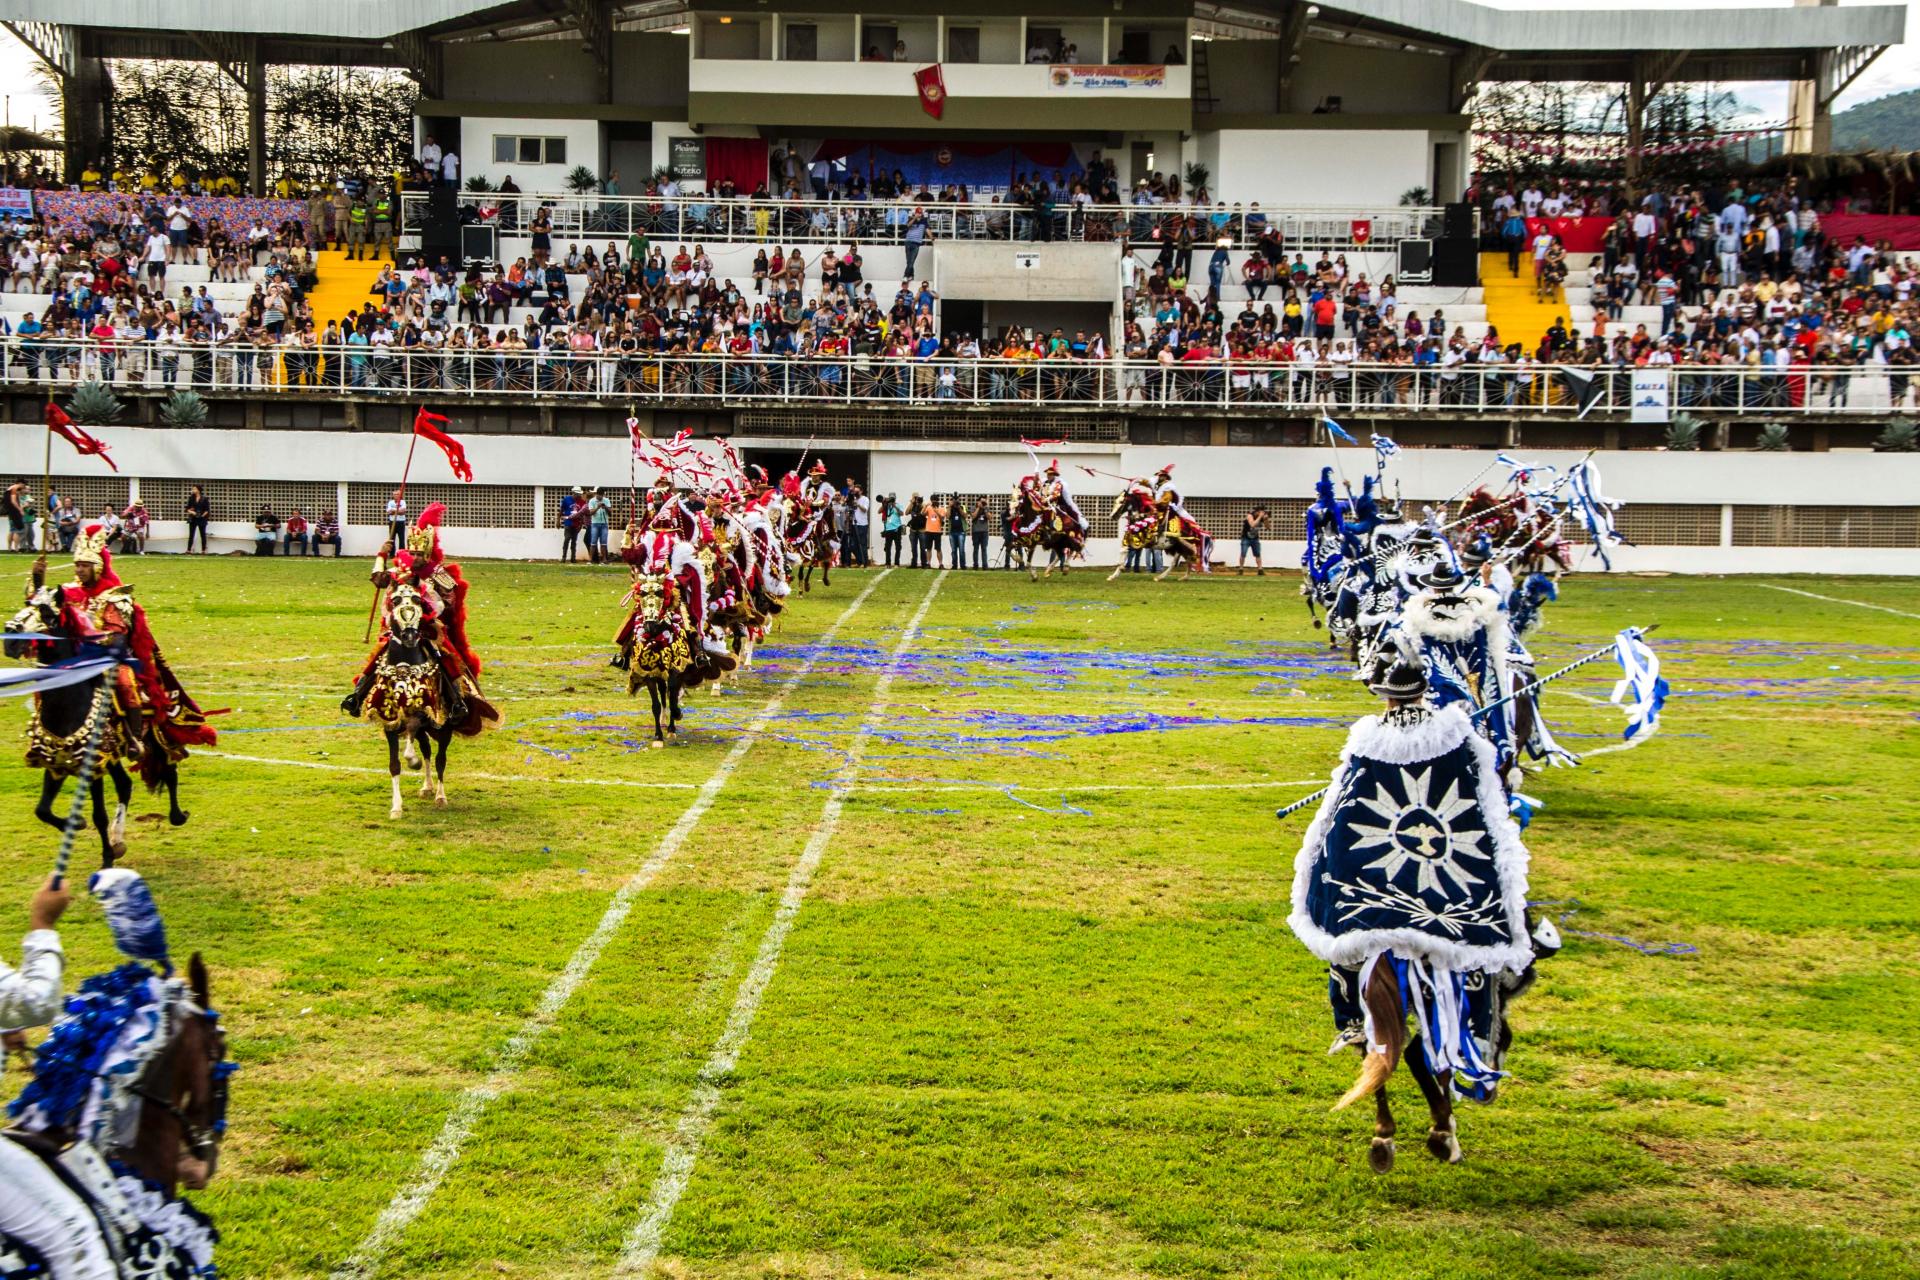 Cavalhadas in Brazil are staged horse shows